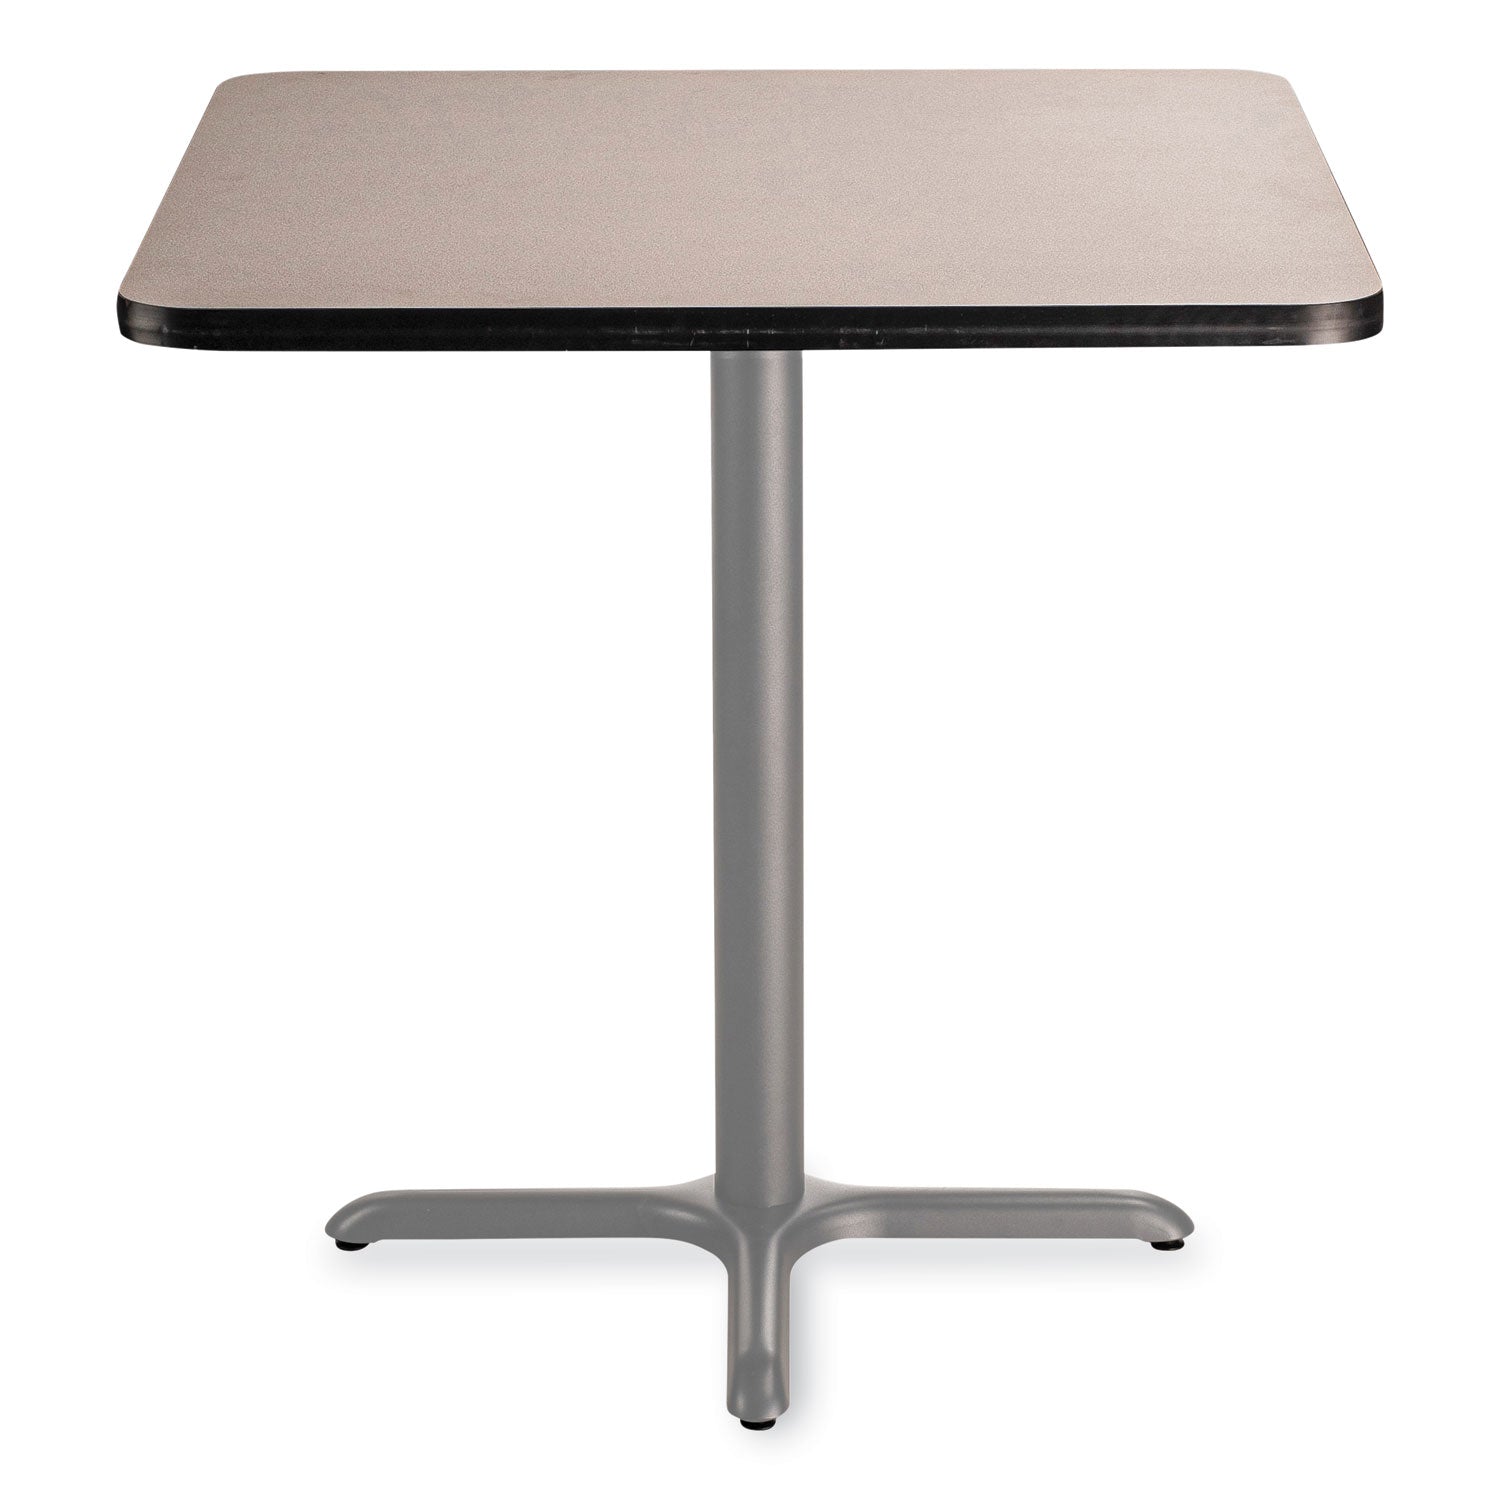 cafe-table-36w-x-36d-x-36h-square-top-x-base-gray-nebula-top-gray-base-ships-in-7-10-business-days_npscg33636xc1gy - 2